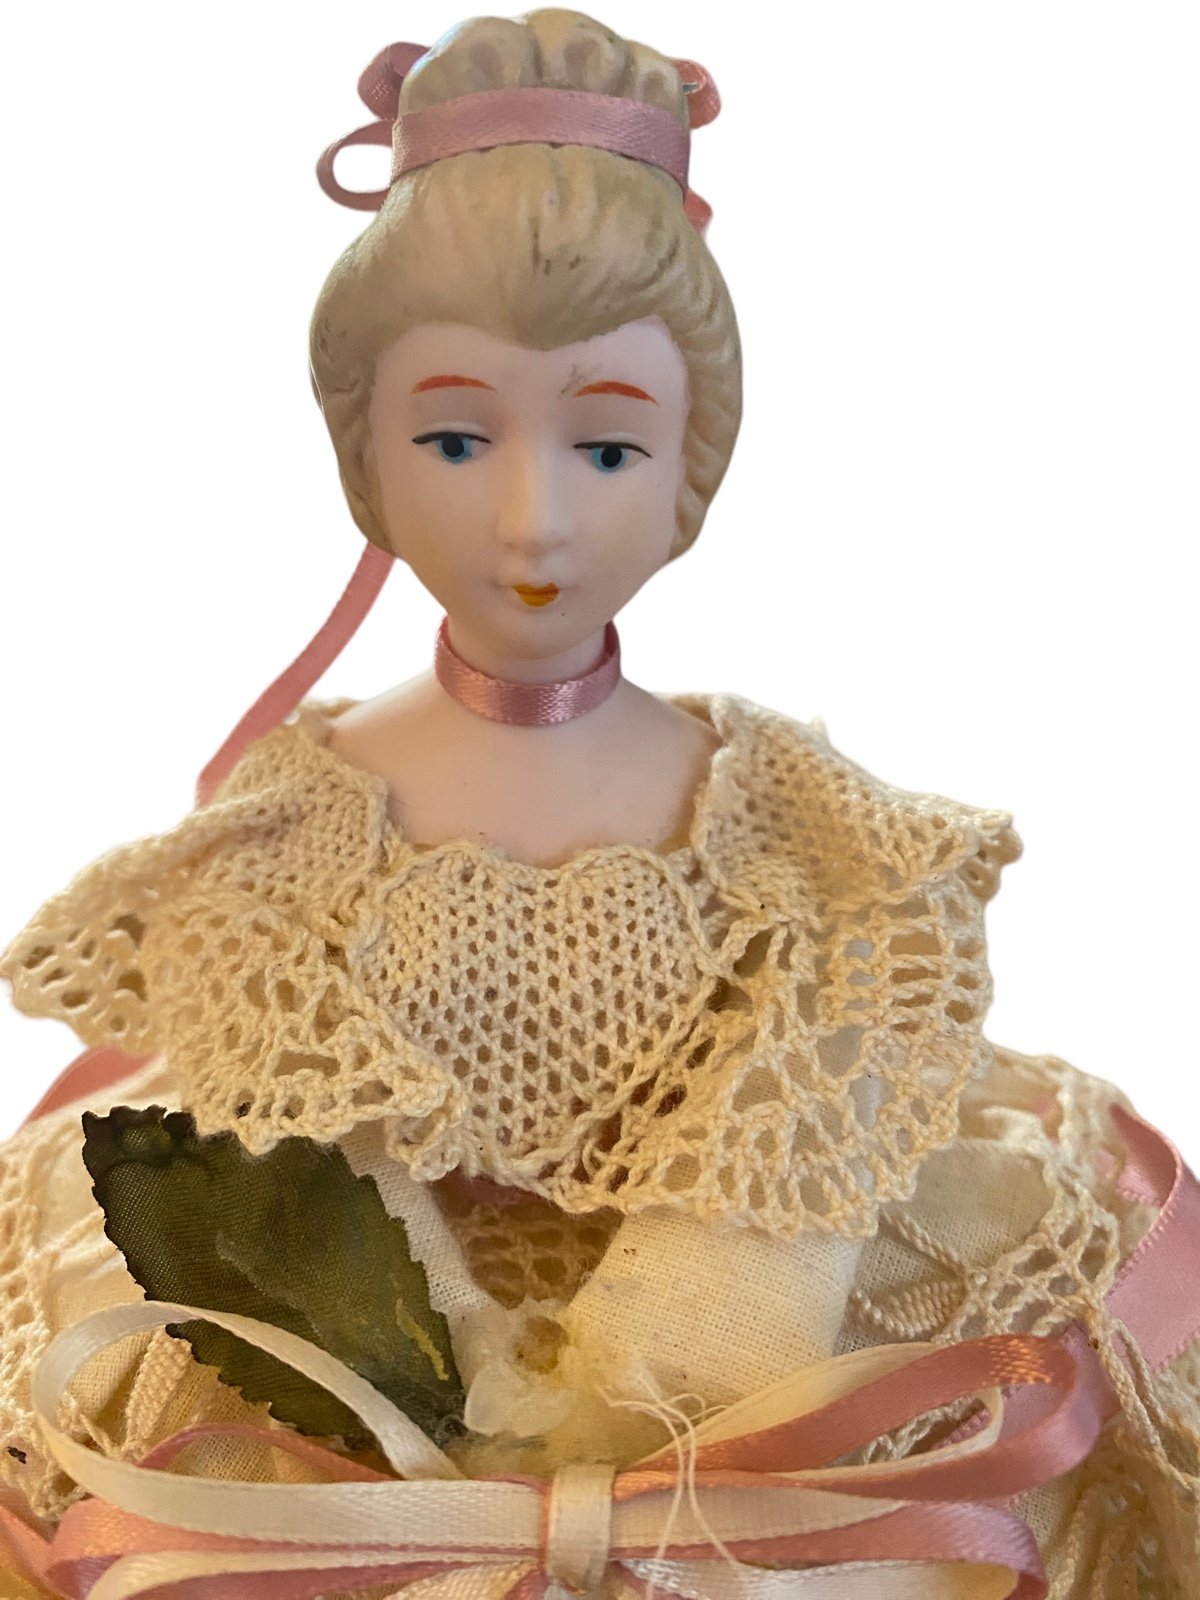 Vintage Air Freshener Doll Topper Porcelain Head Crocheted Lace Dress *Damaged doAODieWn